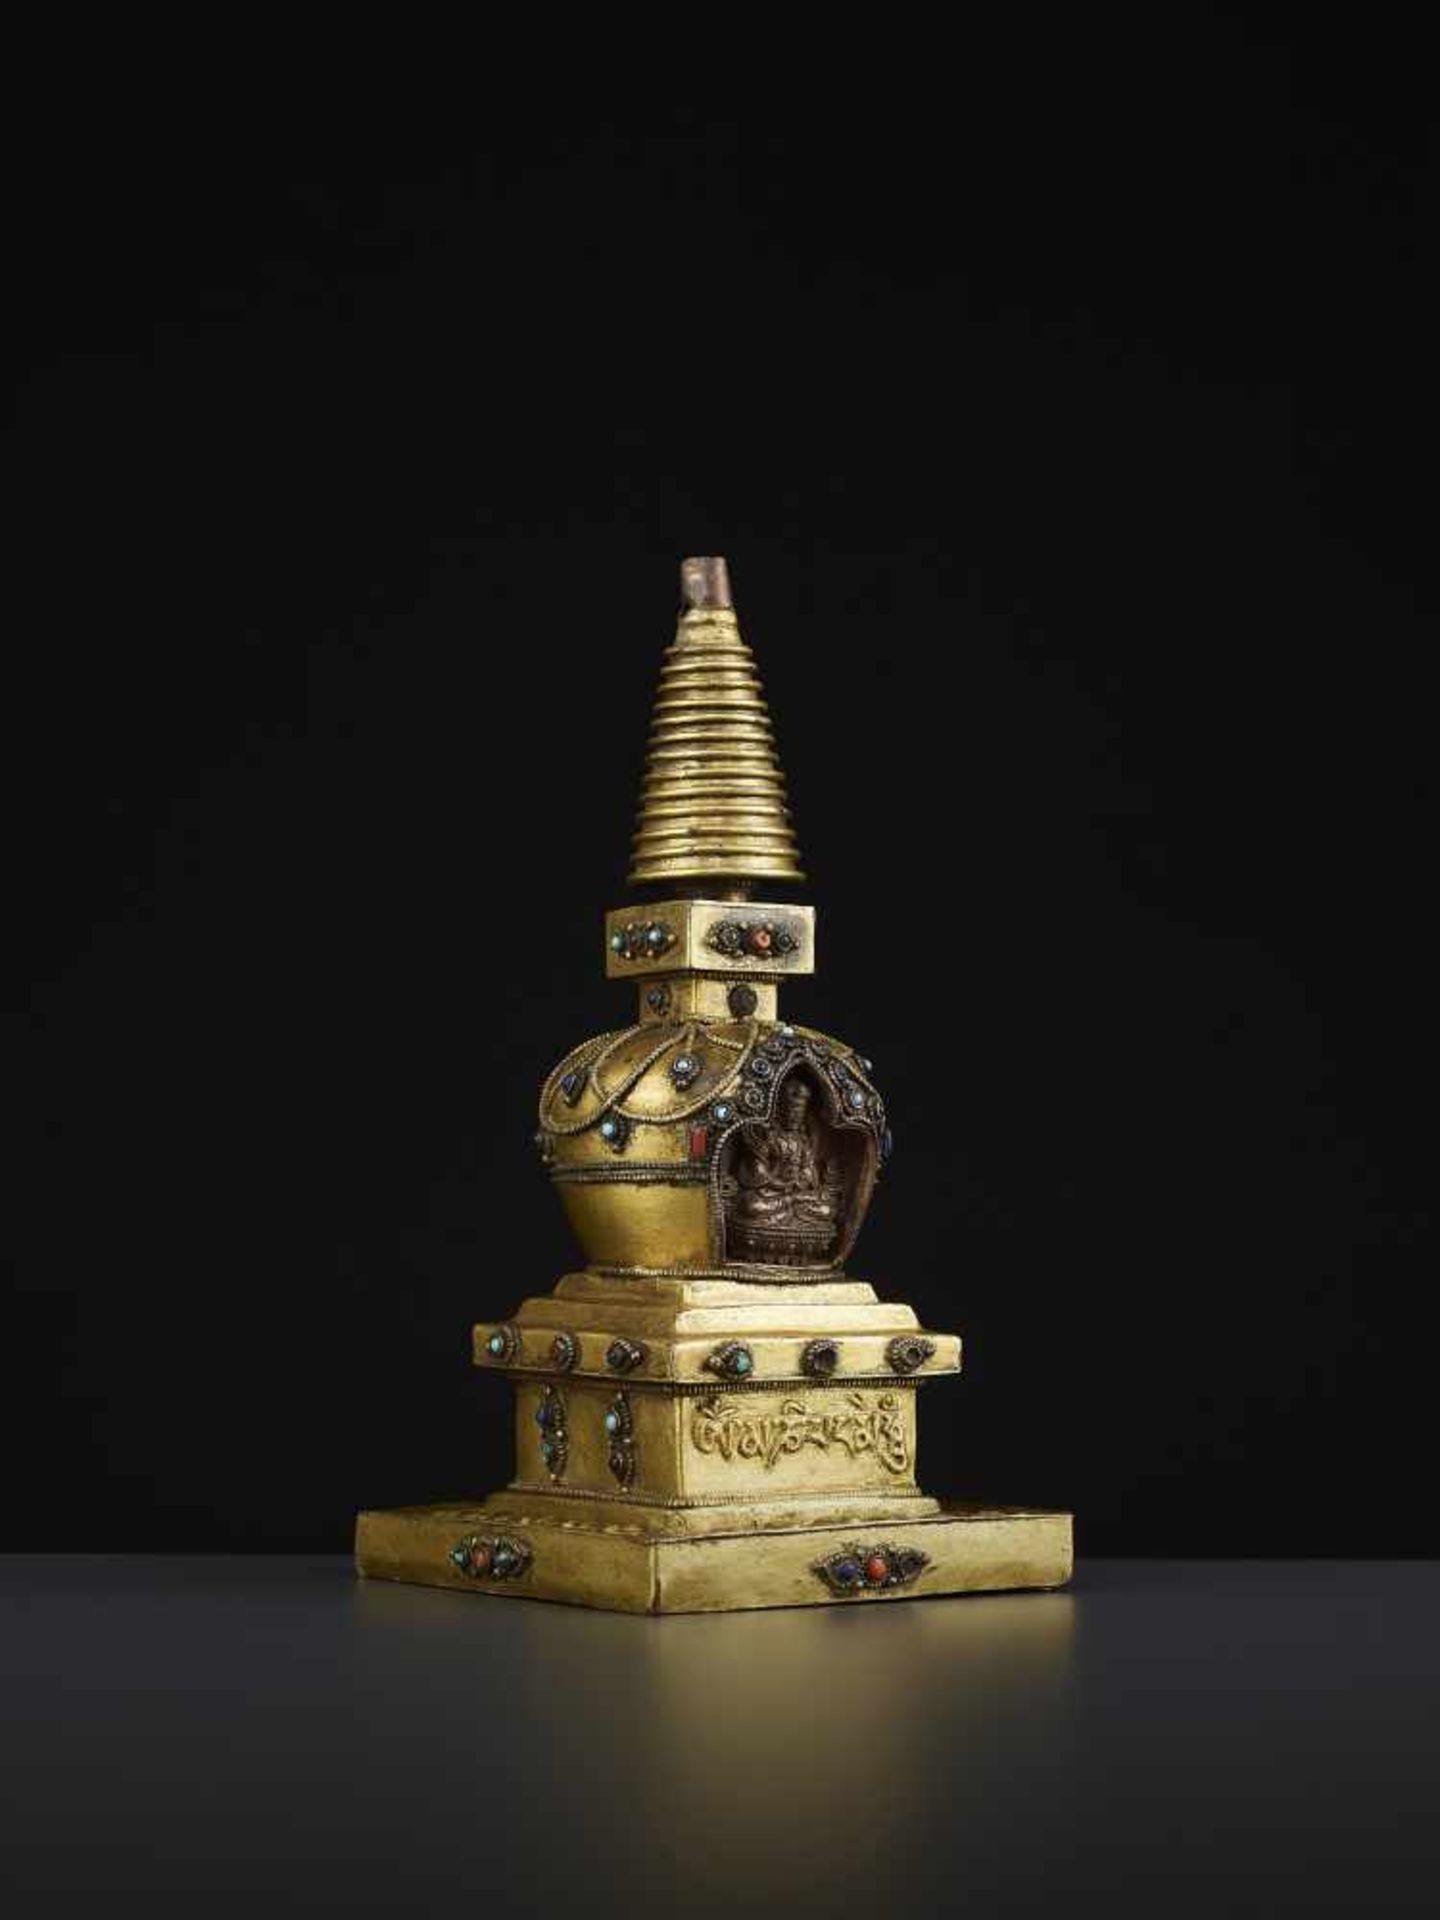 A REPOUSSE STUPA 18TH CENTURYTibet, 18TH to earlier 19TH century. A fire-gilt copper model of a - Image 8 of 11